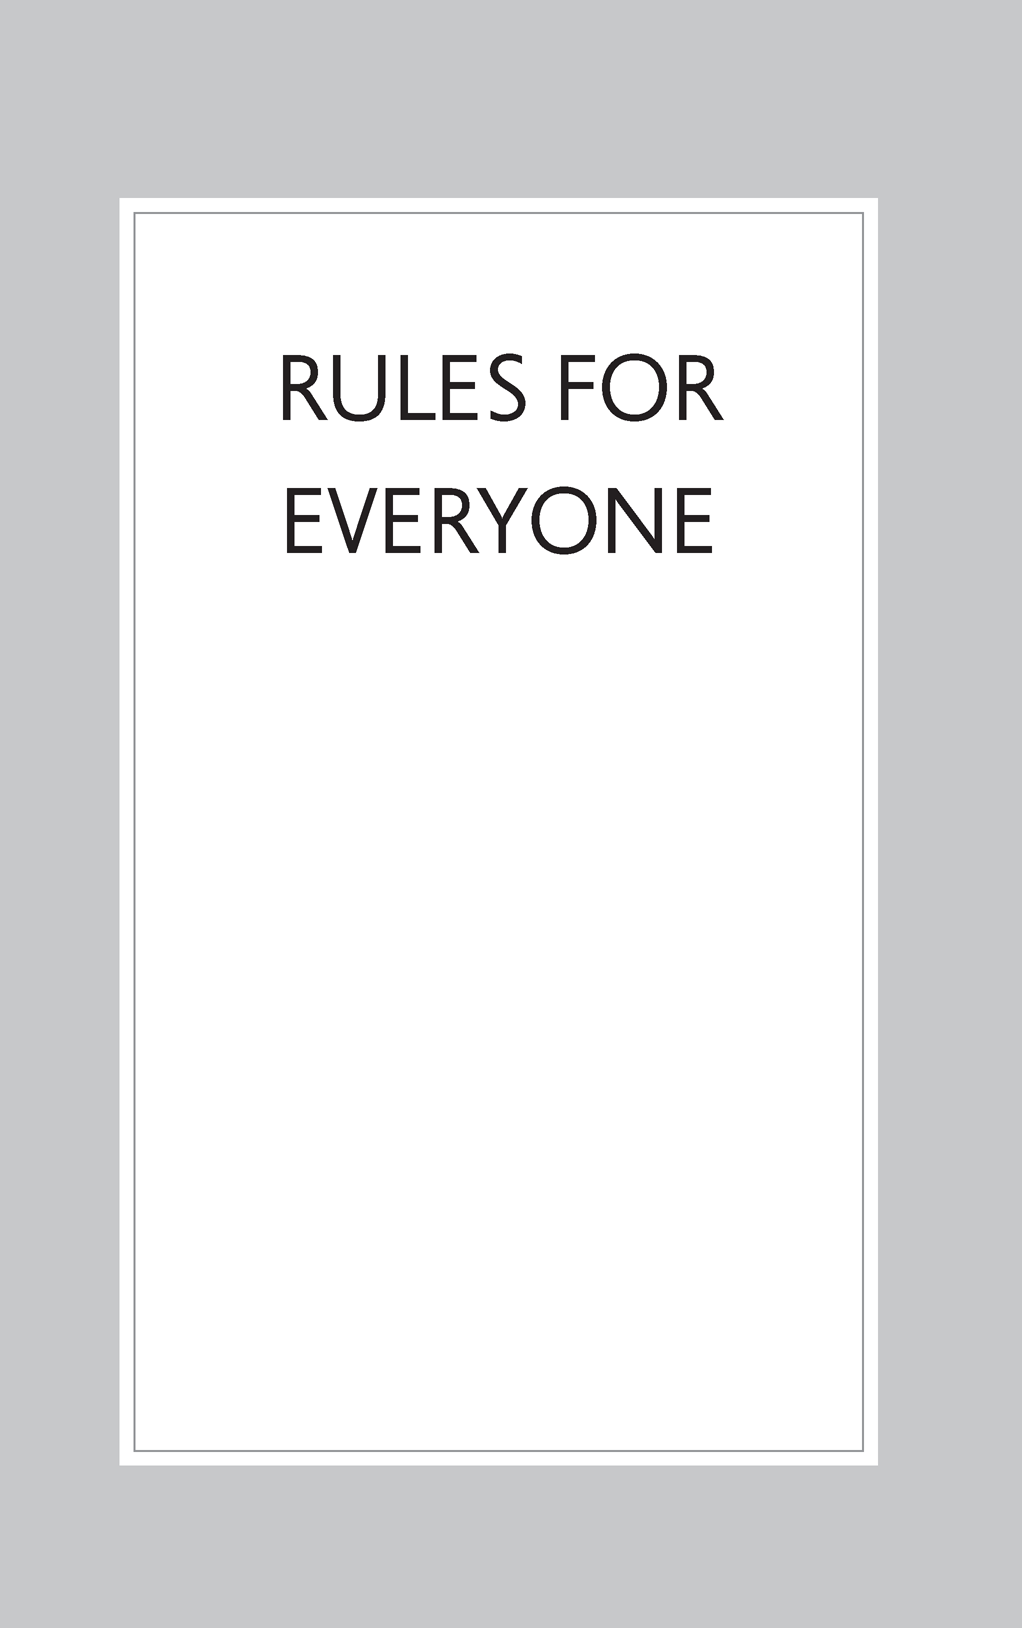 Rules for Everyone